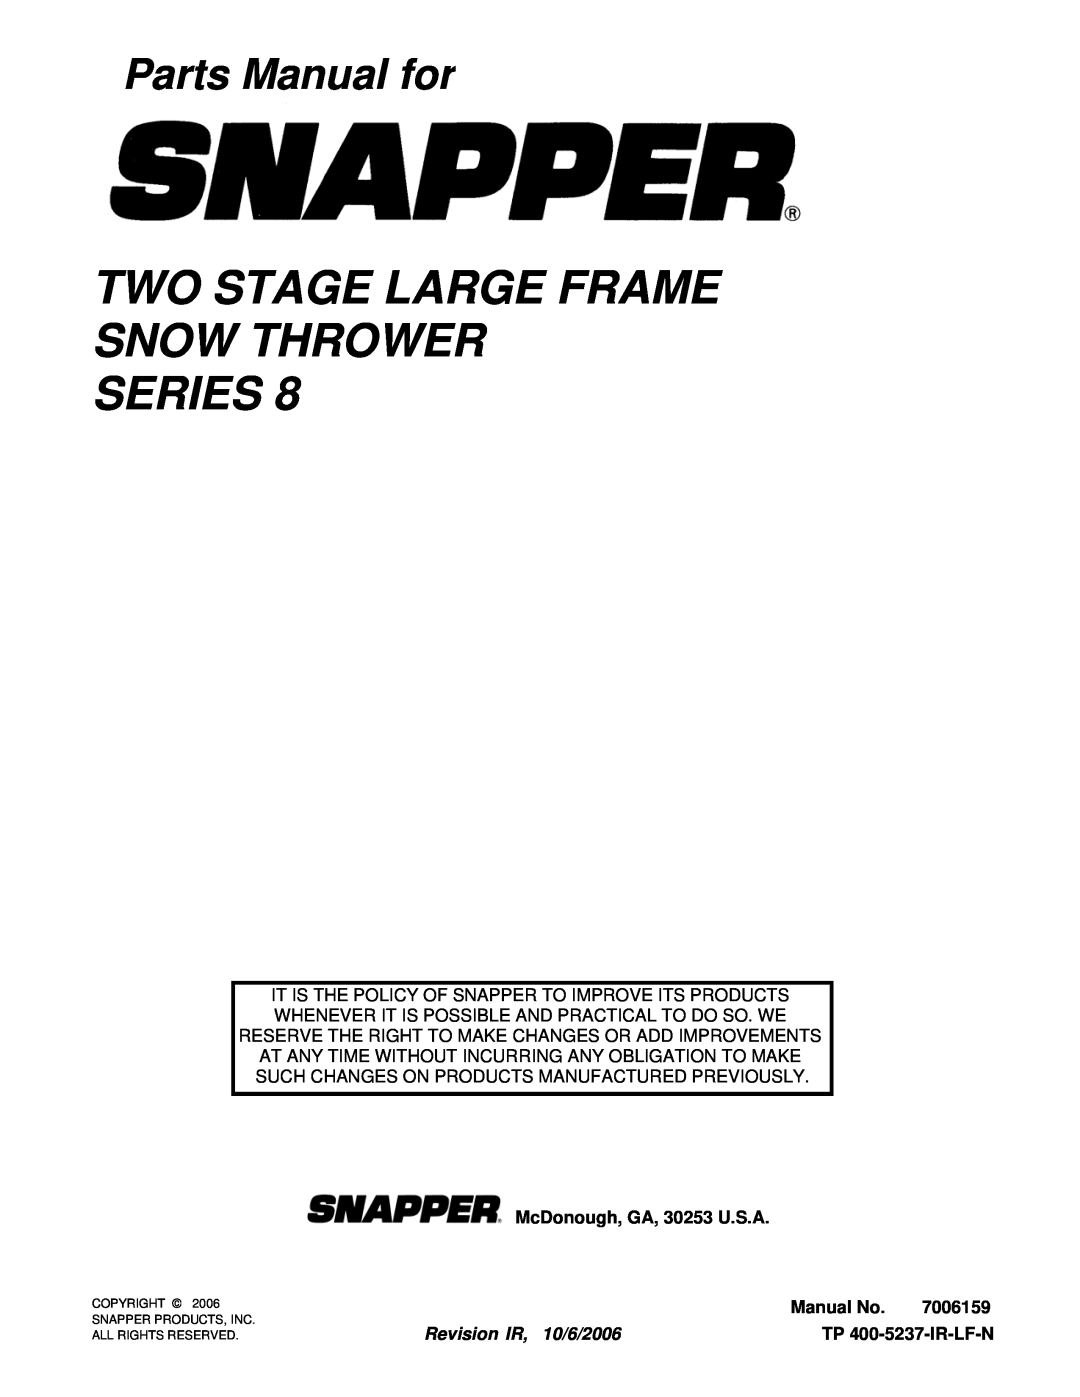 Snapper 115328E, 95288E Two Stage Large Frame Snow Thrower Series, Parts Manual for, McDonough, GA, 30253 U.S.A, Manual No 